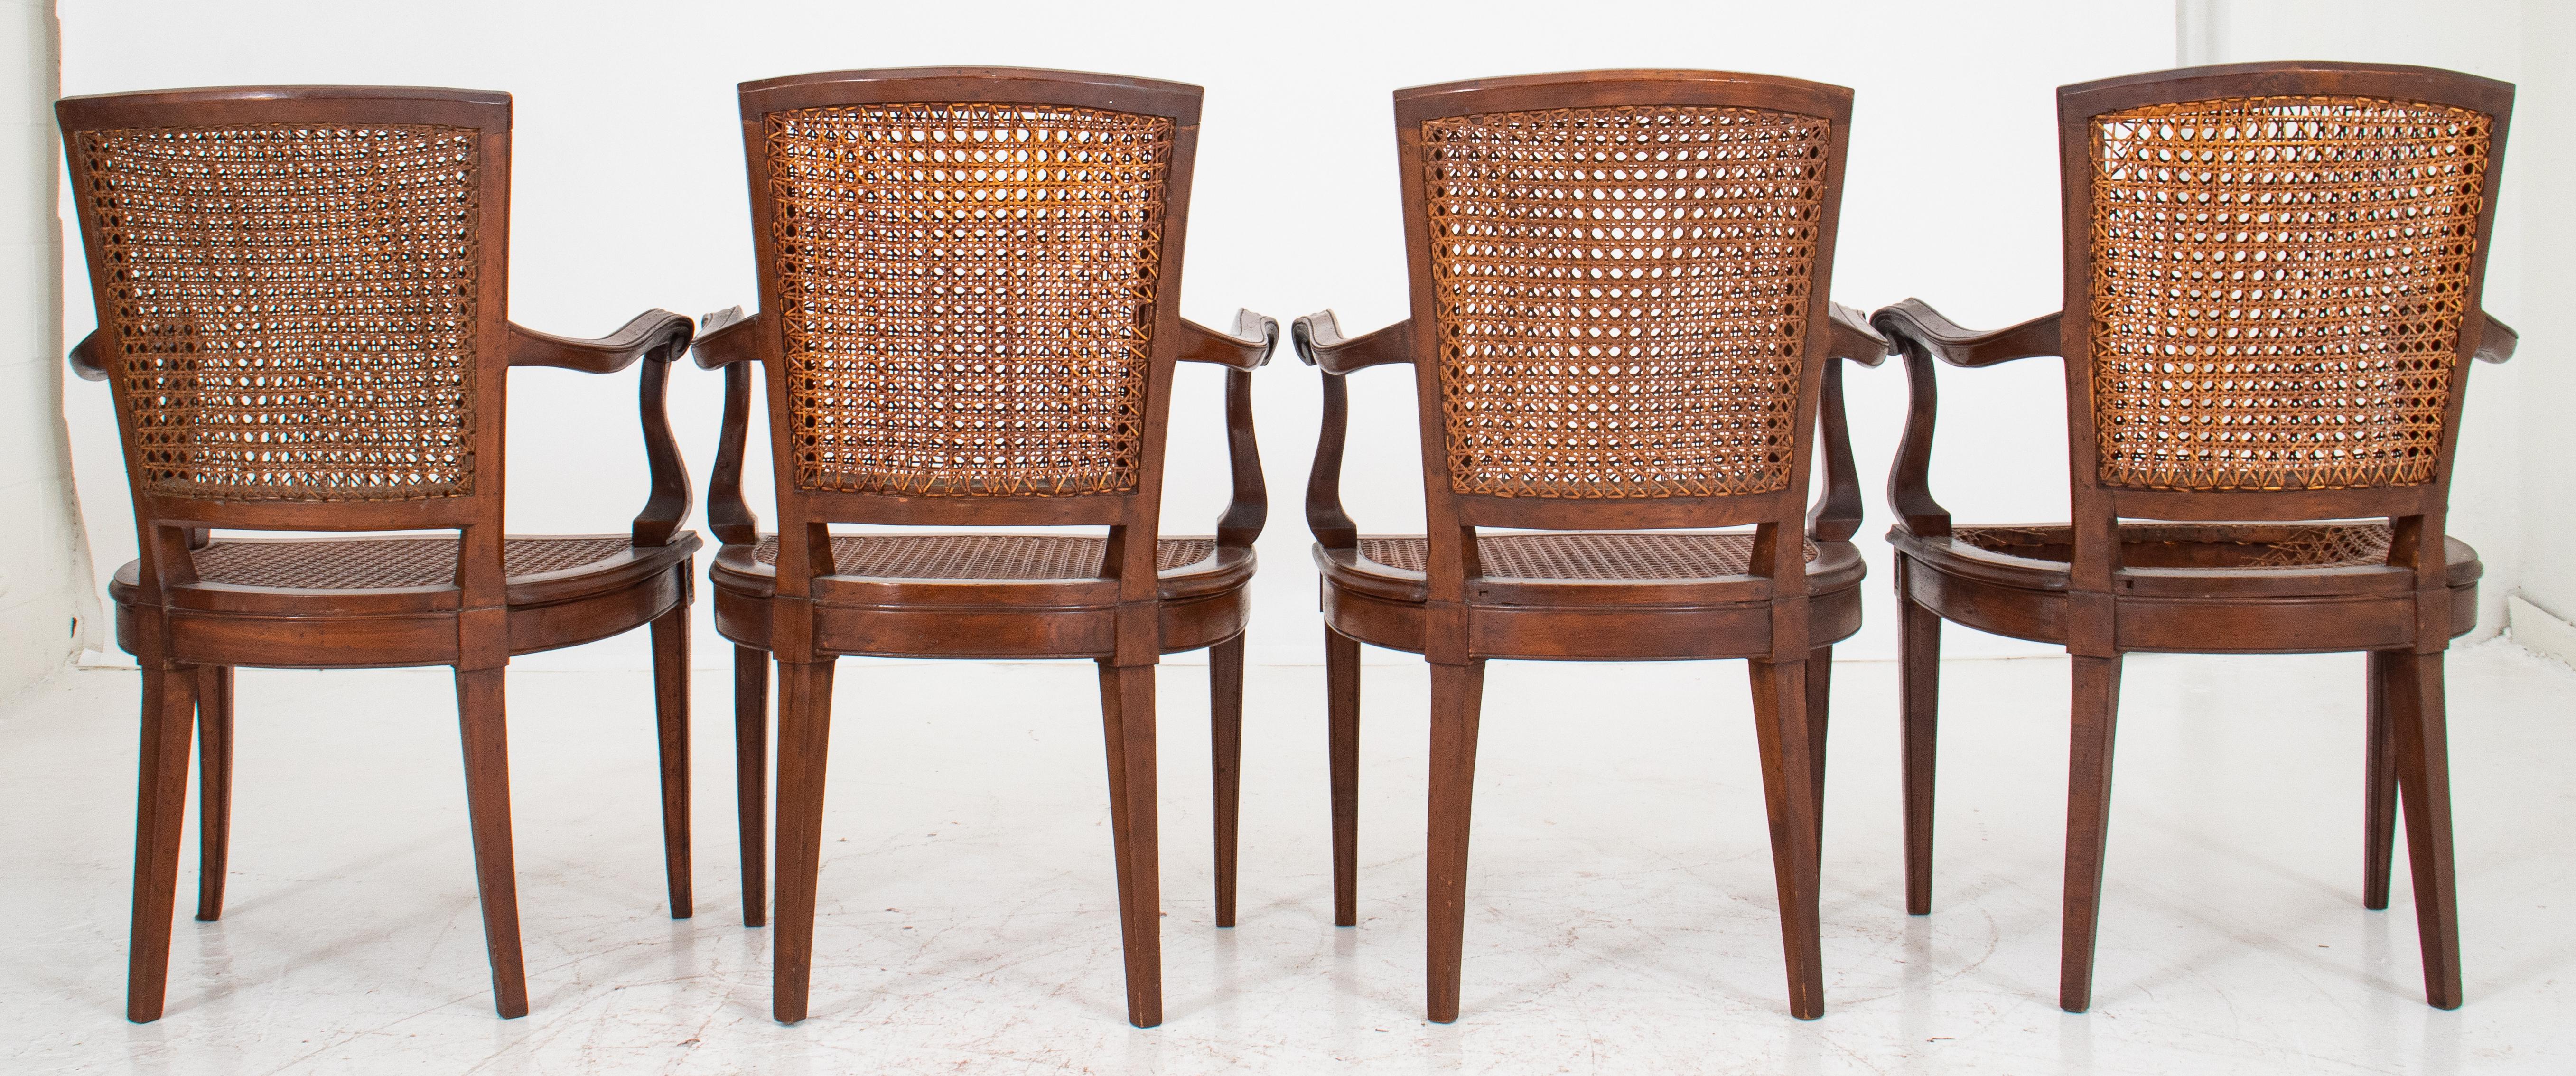 Cane Italian Neoclassical Provincial Style Armchairs For Sale